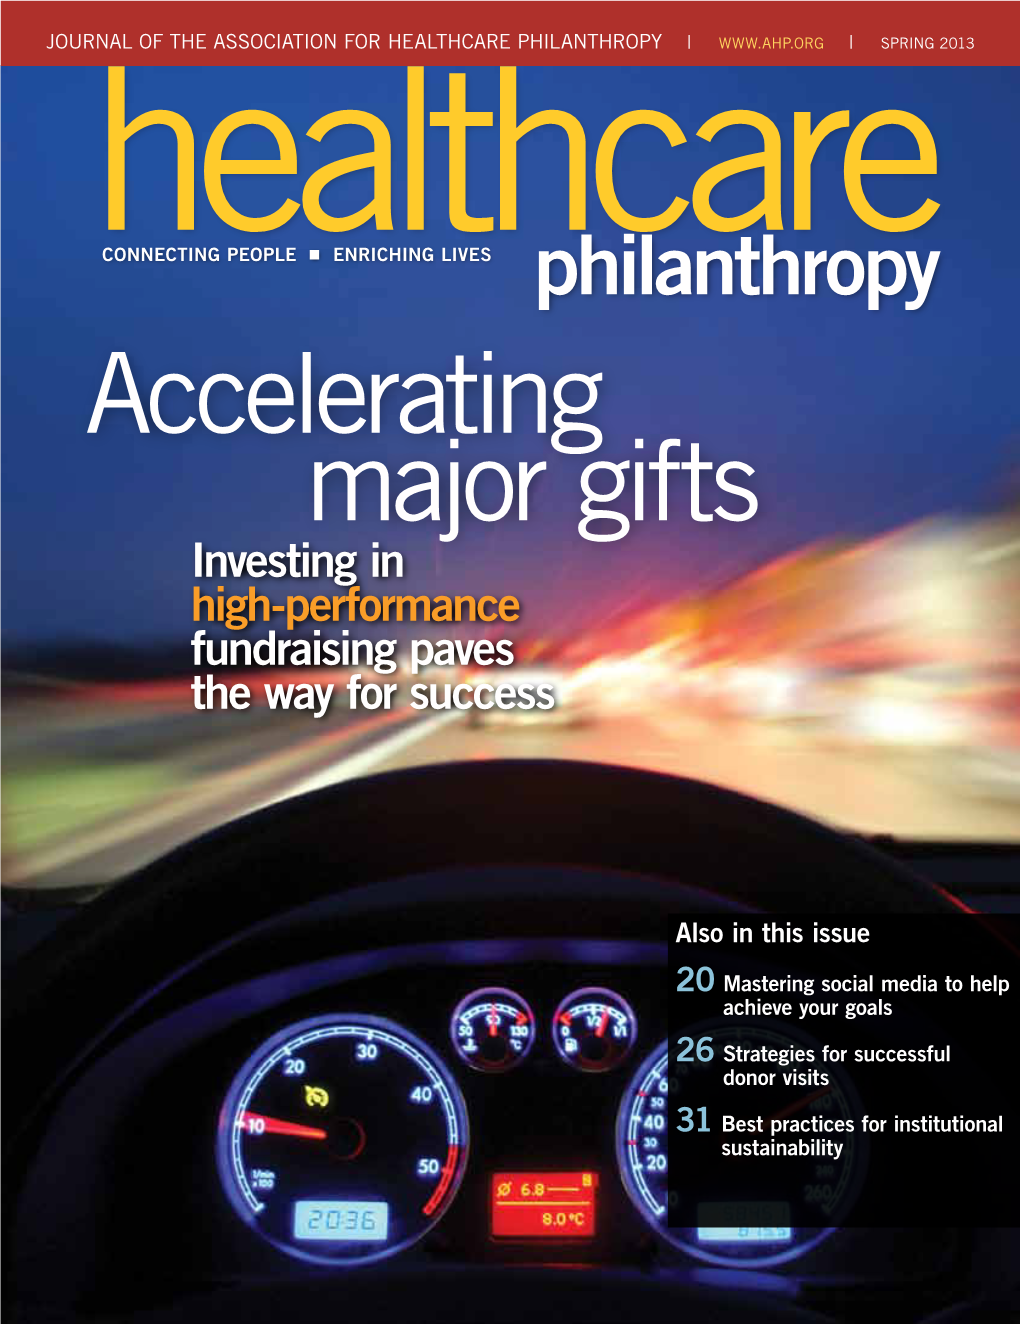 Accelerating Major Gifts Investing in High-Performance Fundraising Paves the Way for Success